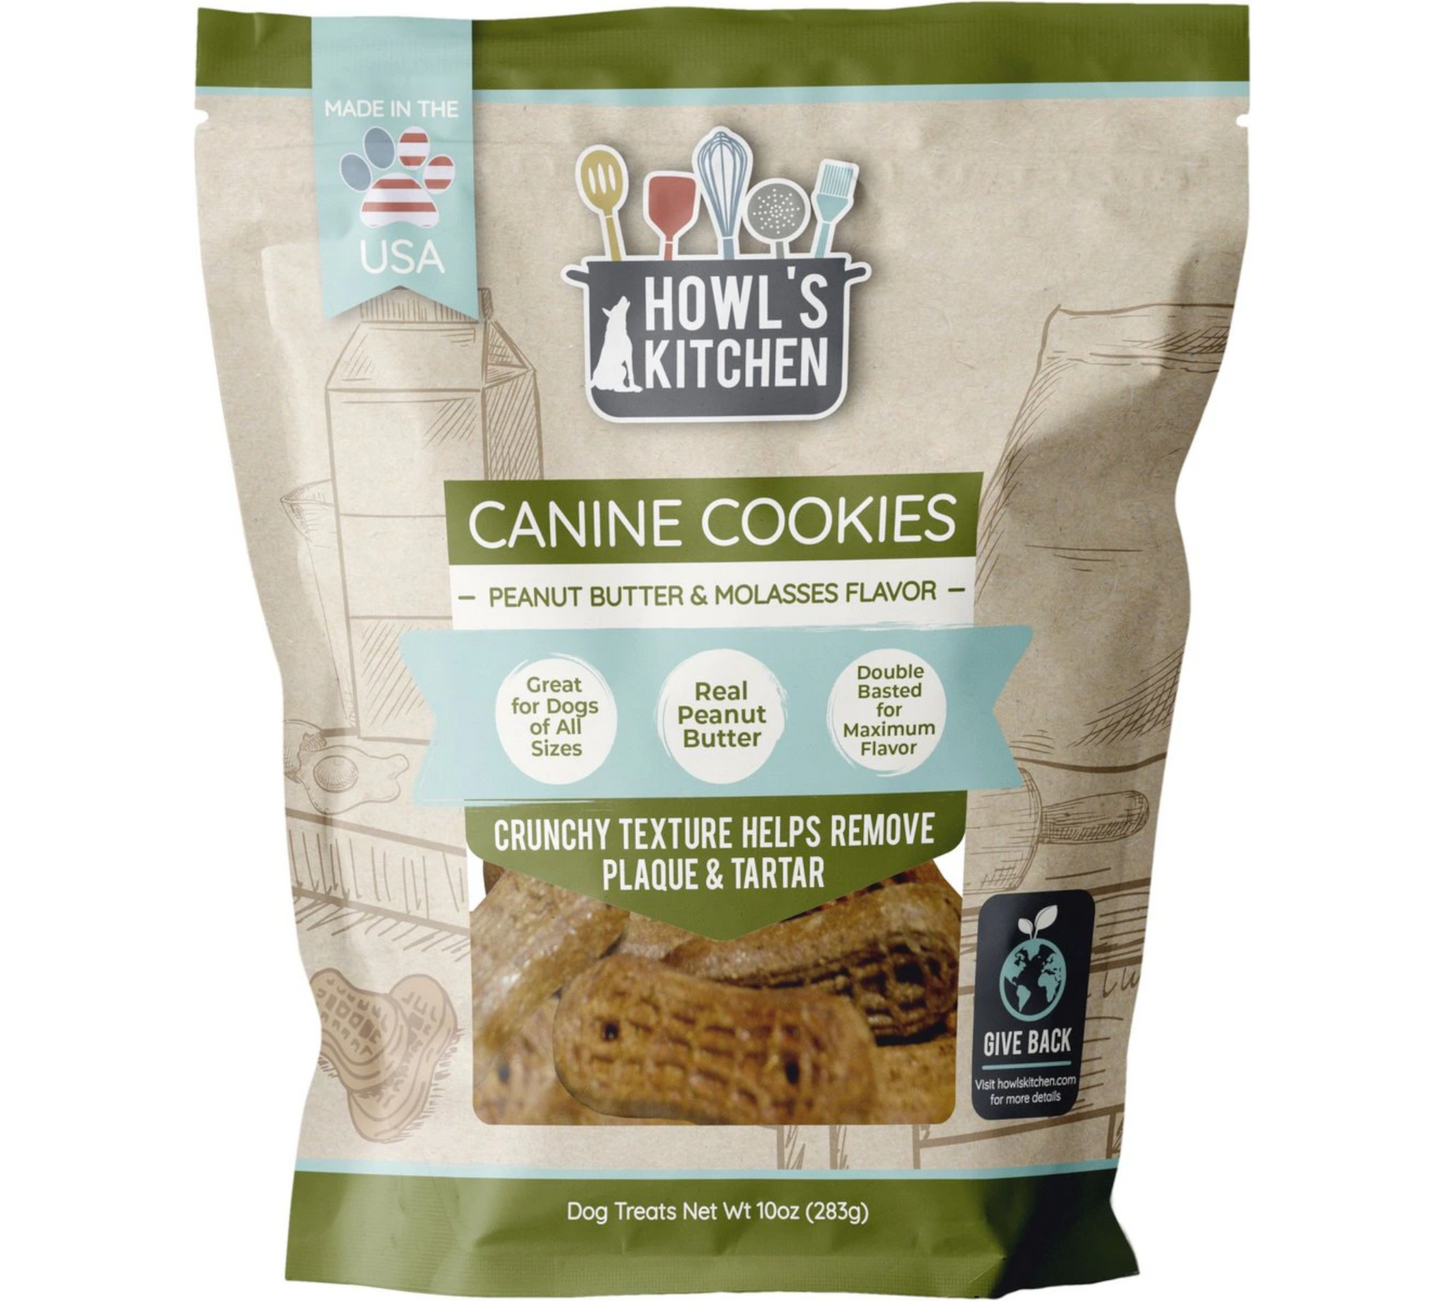 Howl's Kitchen Canine Cookies Peanut Butter & Molasses Flavor Dog Treats,